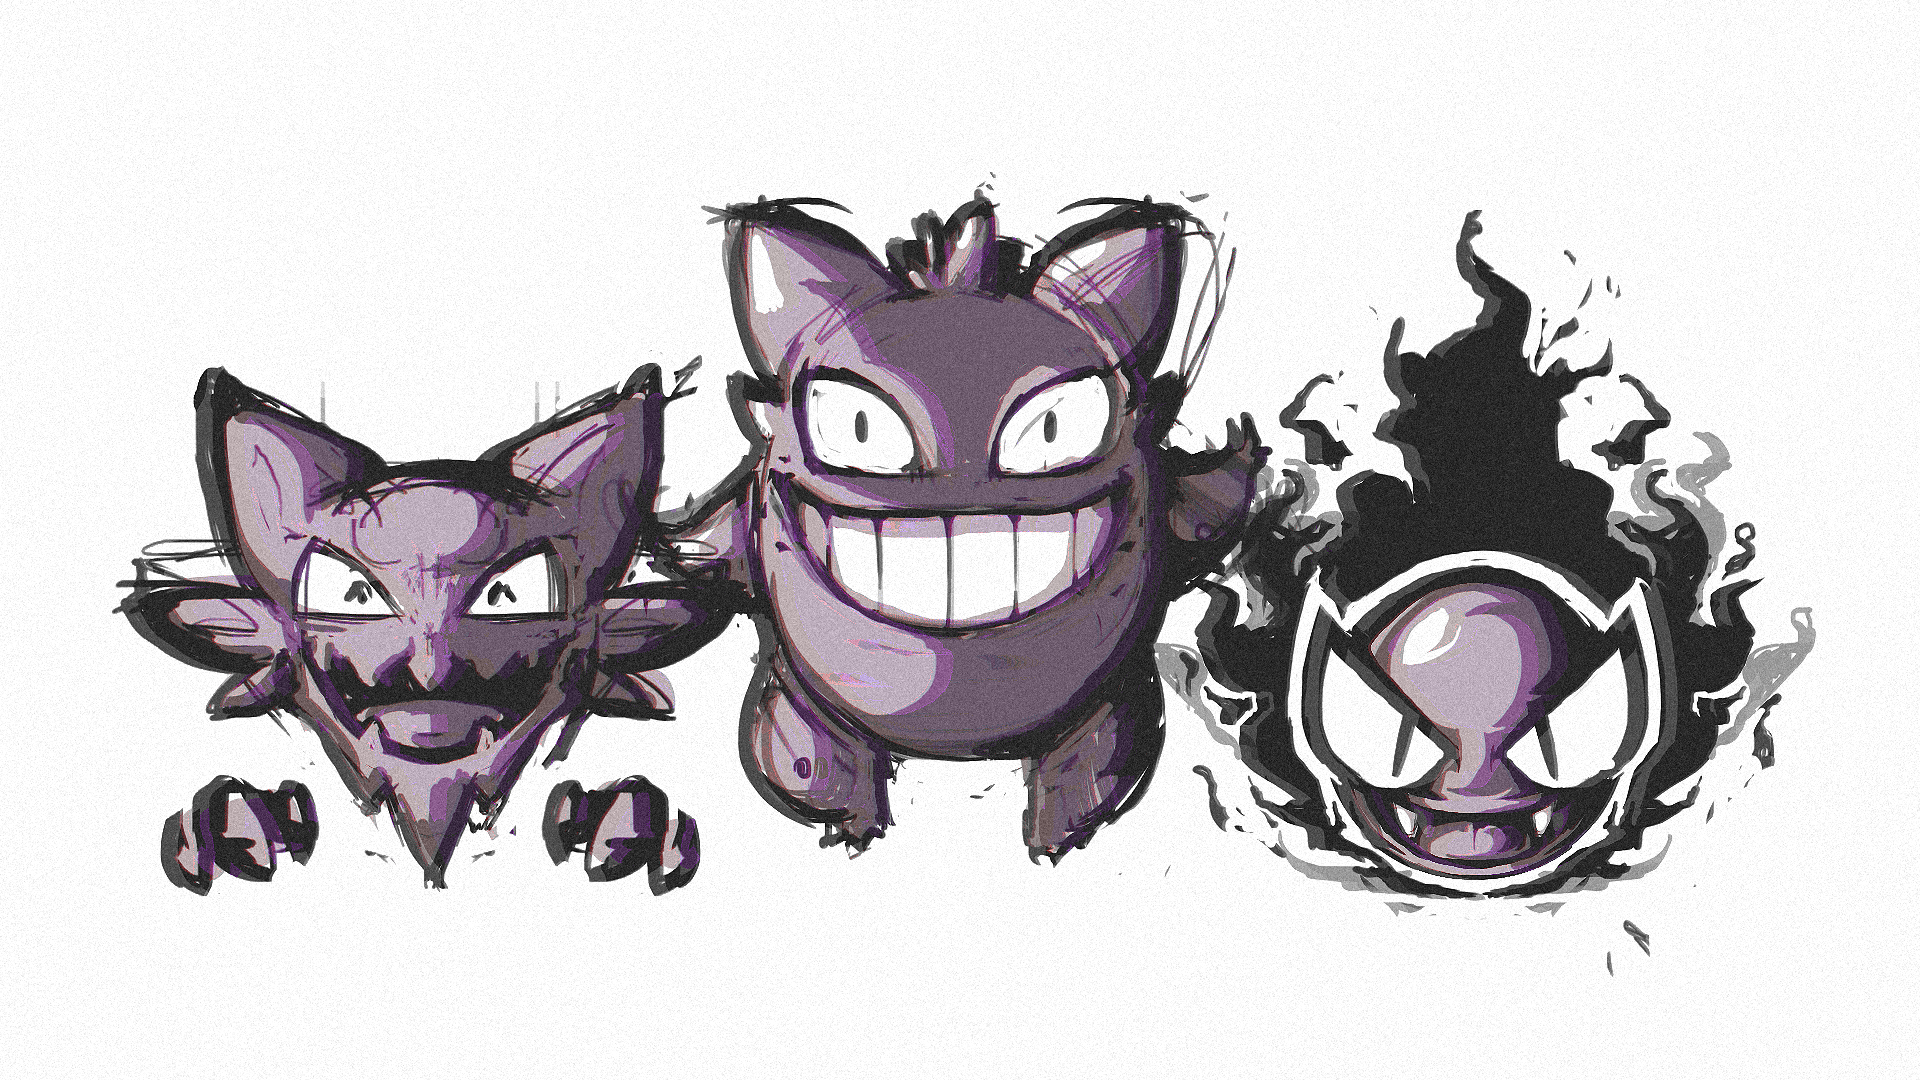 General 1920x1080 Pokémon ghost Gastly Haunter video game characters